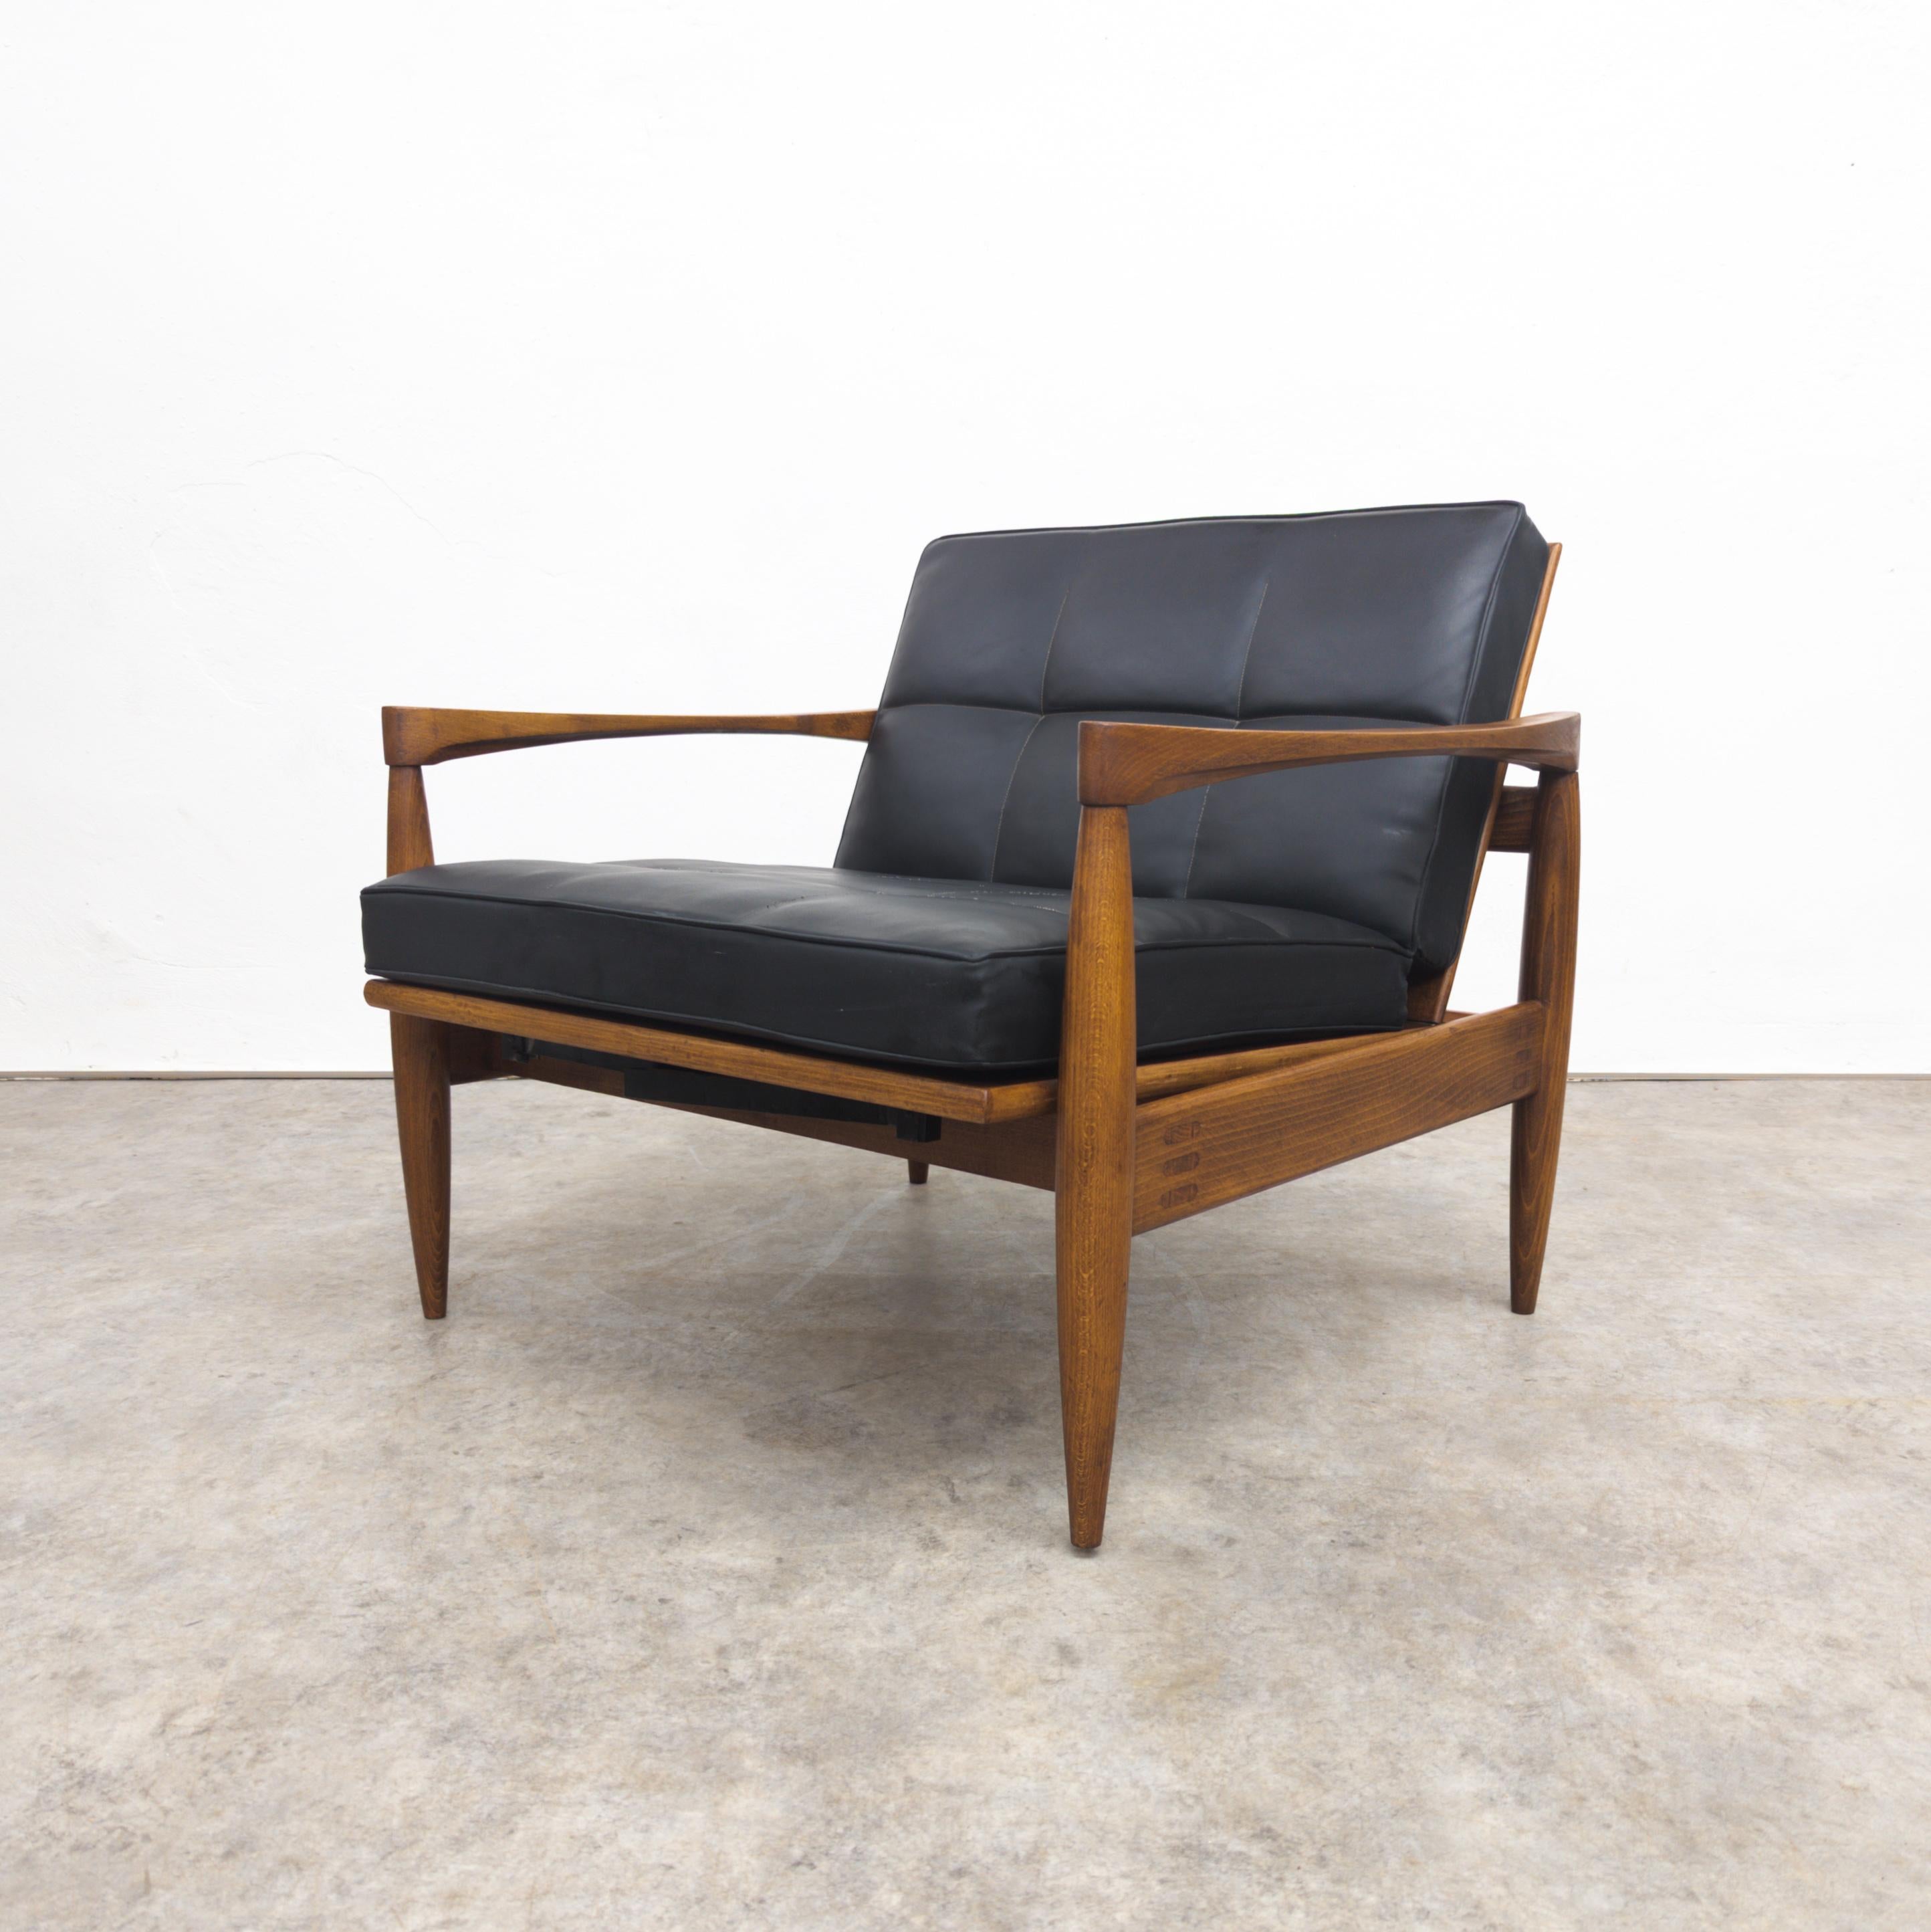 Unique and very well crafted adjustable armchair manufactured in the 1960s. Unfortunately designer and maker are unknown. Made of teak wood with original vinyl cushion. Height 60 cm, width 77 cm, depth 72 cm. Length when unfolded 100 cm, seat height